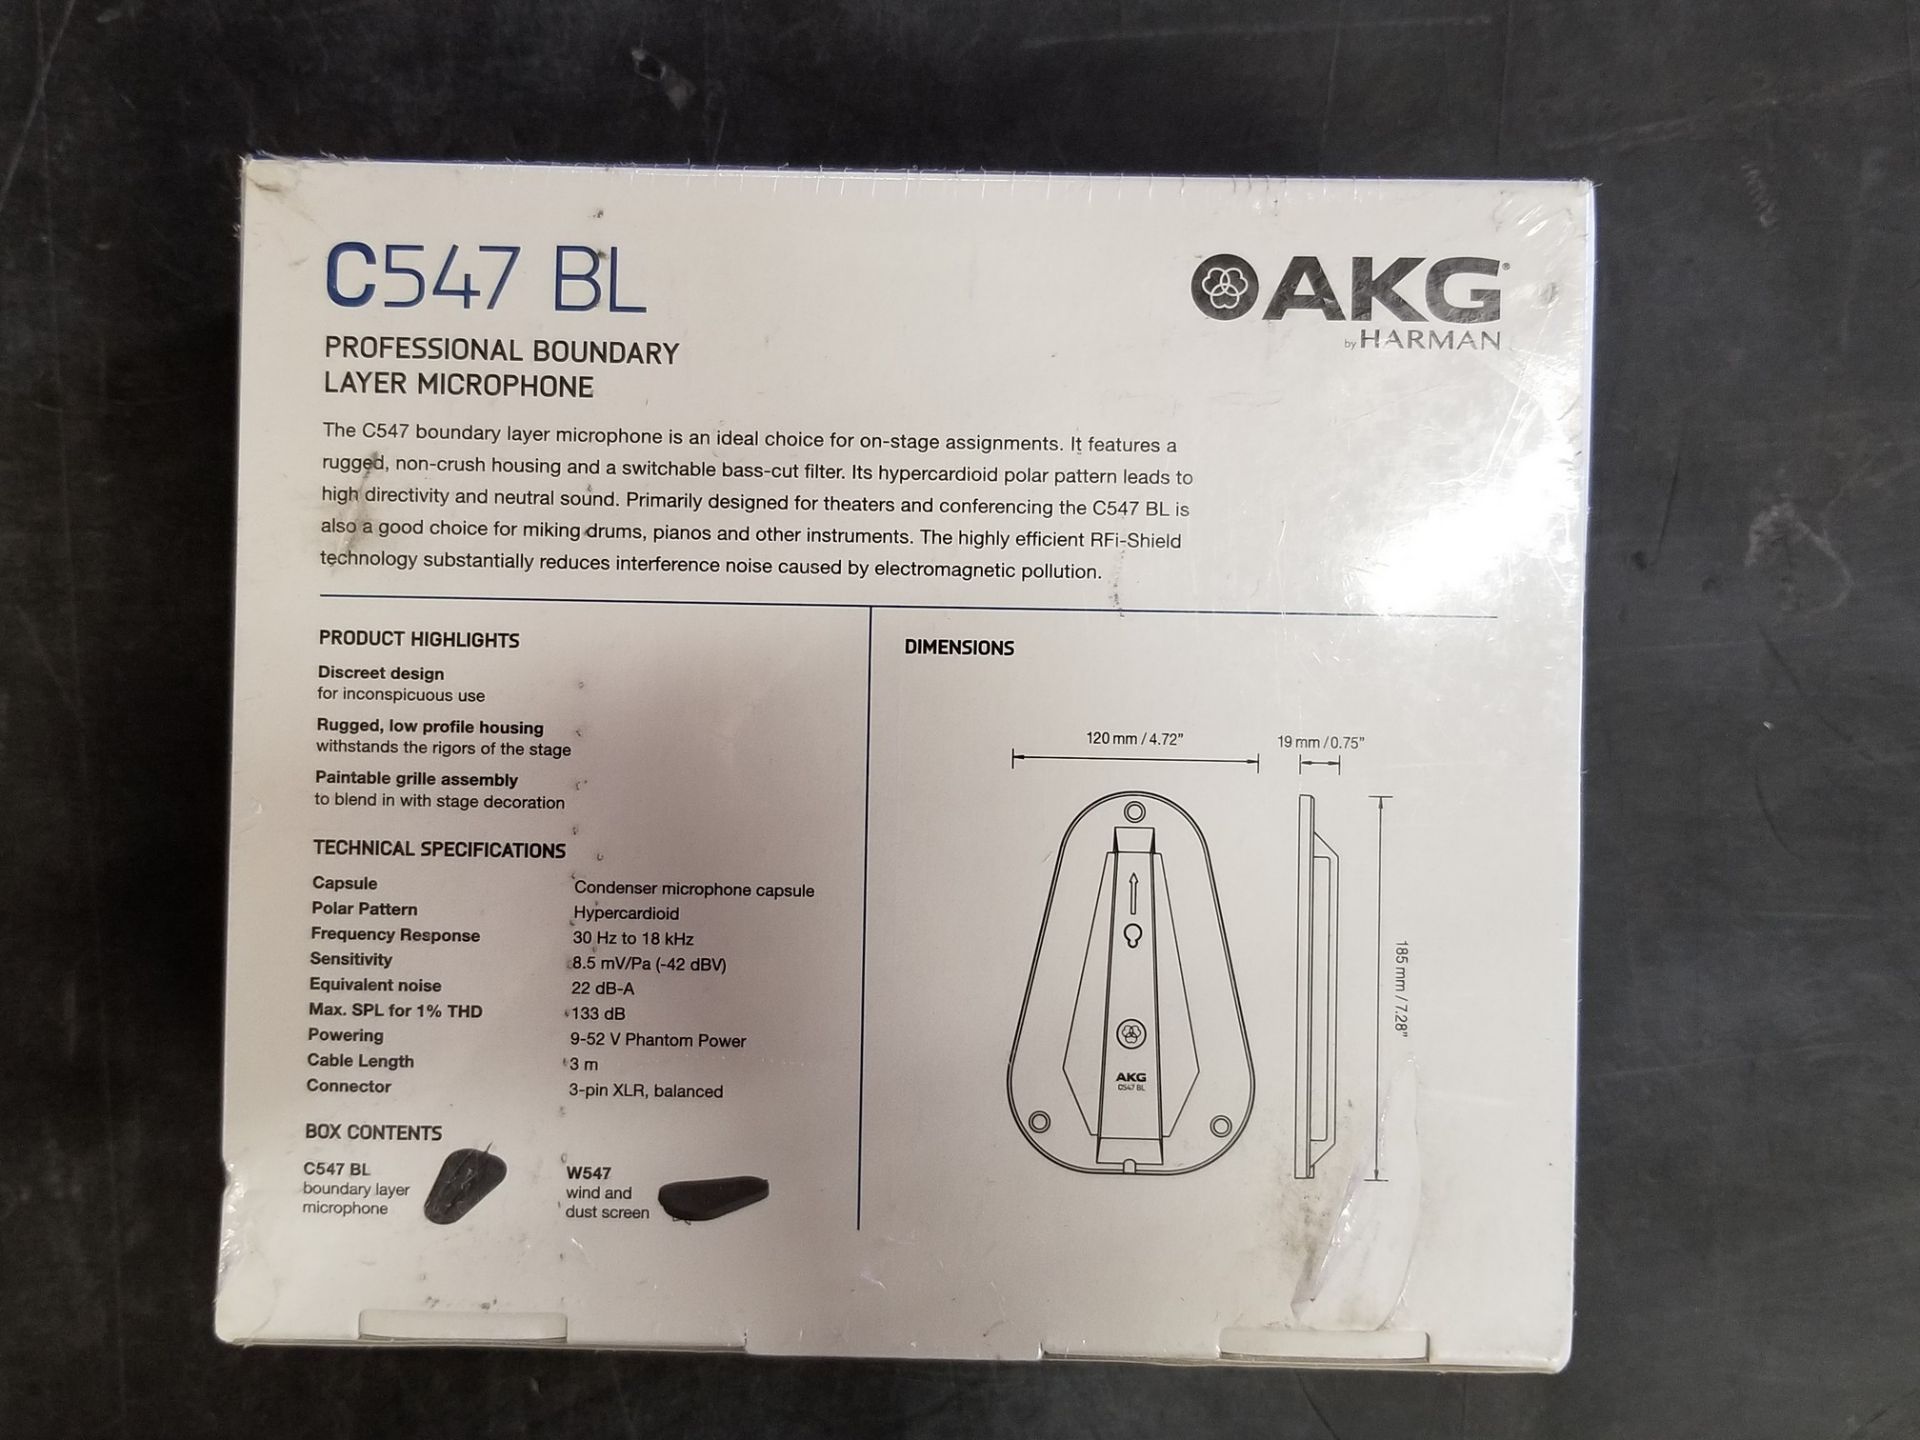 AKG, C547 BL PROFESSIONAL BOUNDARY LAYER MICROPHONE - (BNIB) MSRP $400 USD - Image 3 of 3